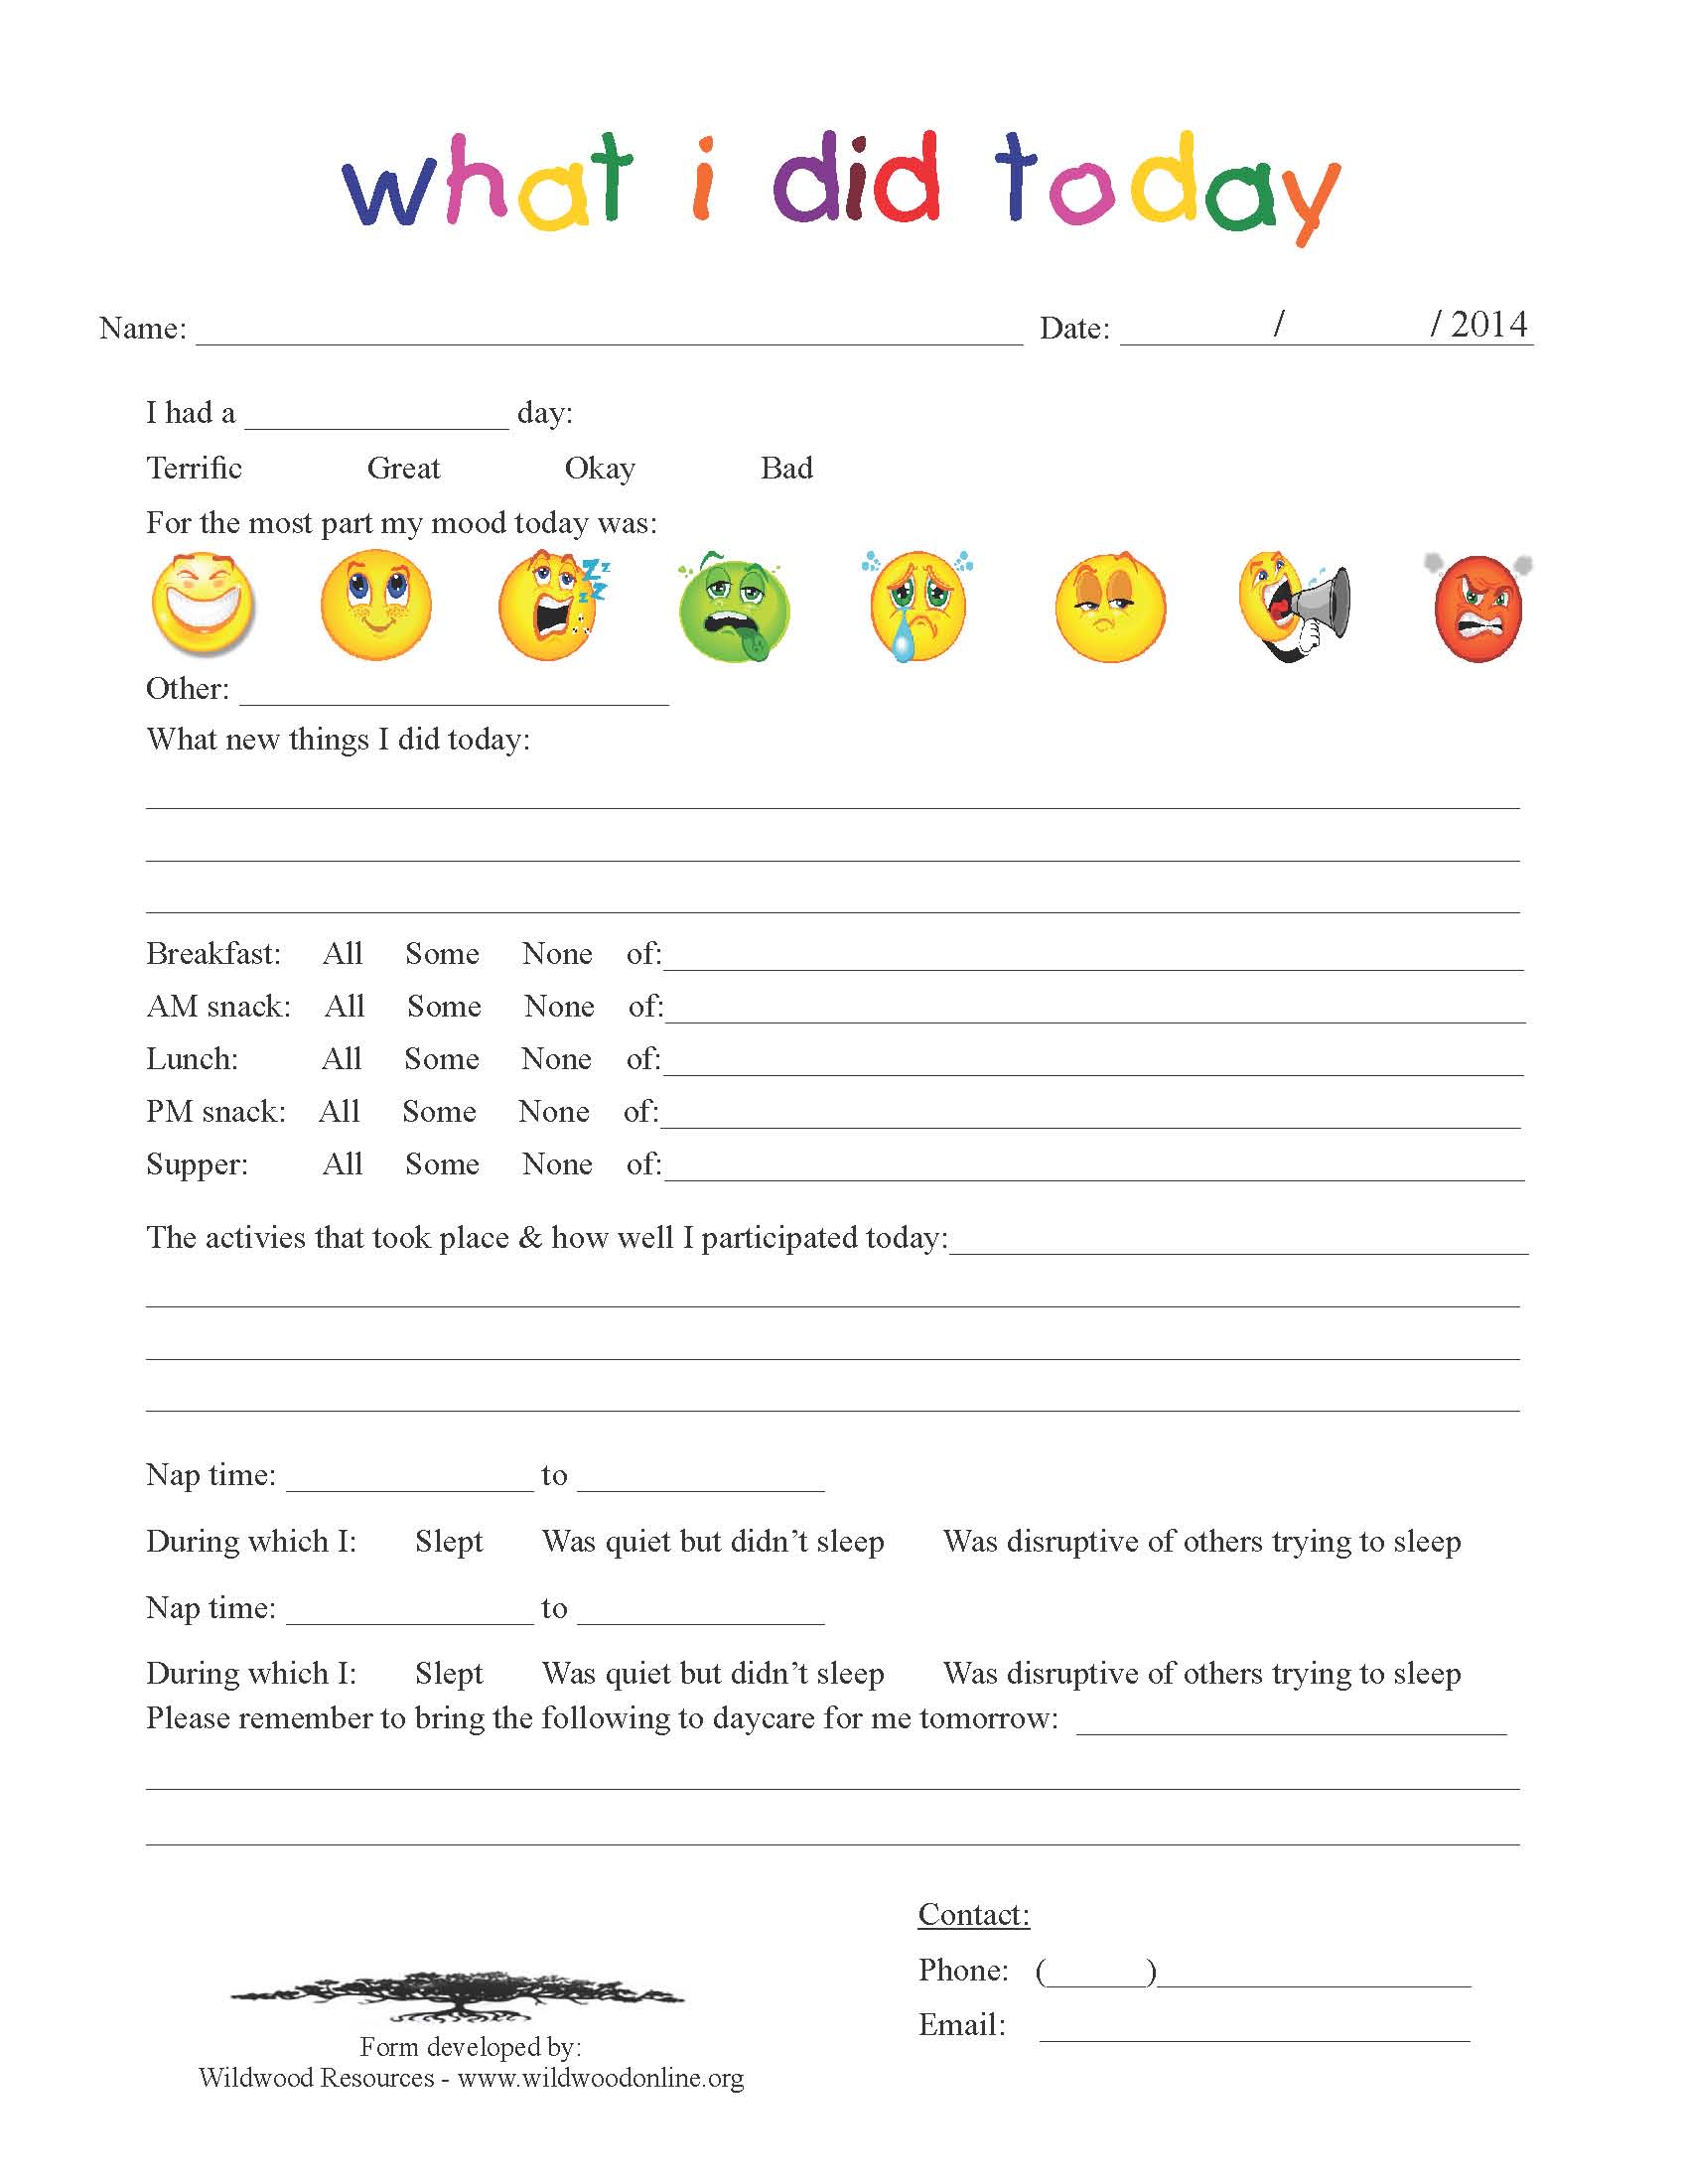 Child Care Forms Download #205